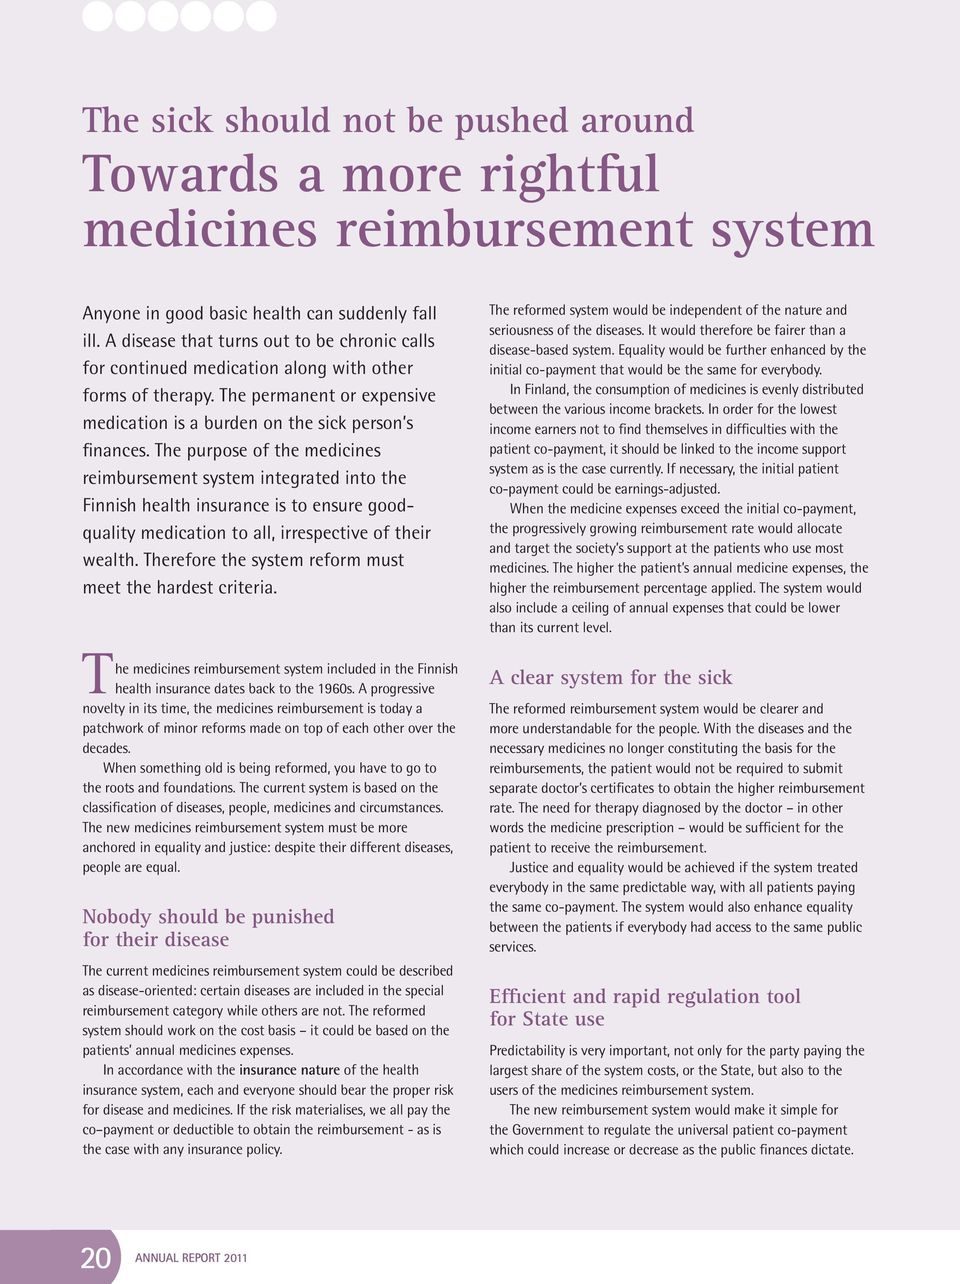 The purpose of the medicines reimbursement system integrated into the Finnish health insurance is to ensure goodquality medication to all, irrespective of their wealth.